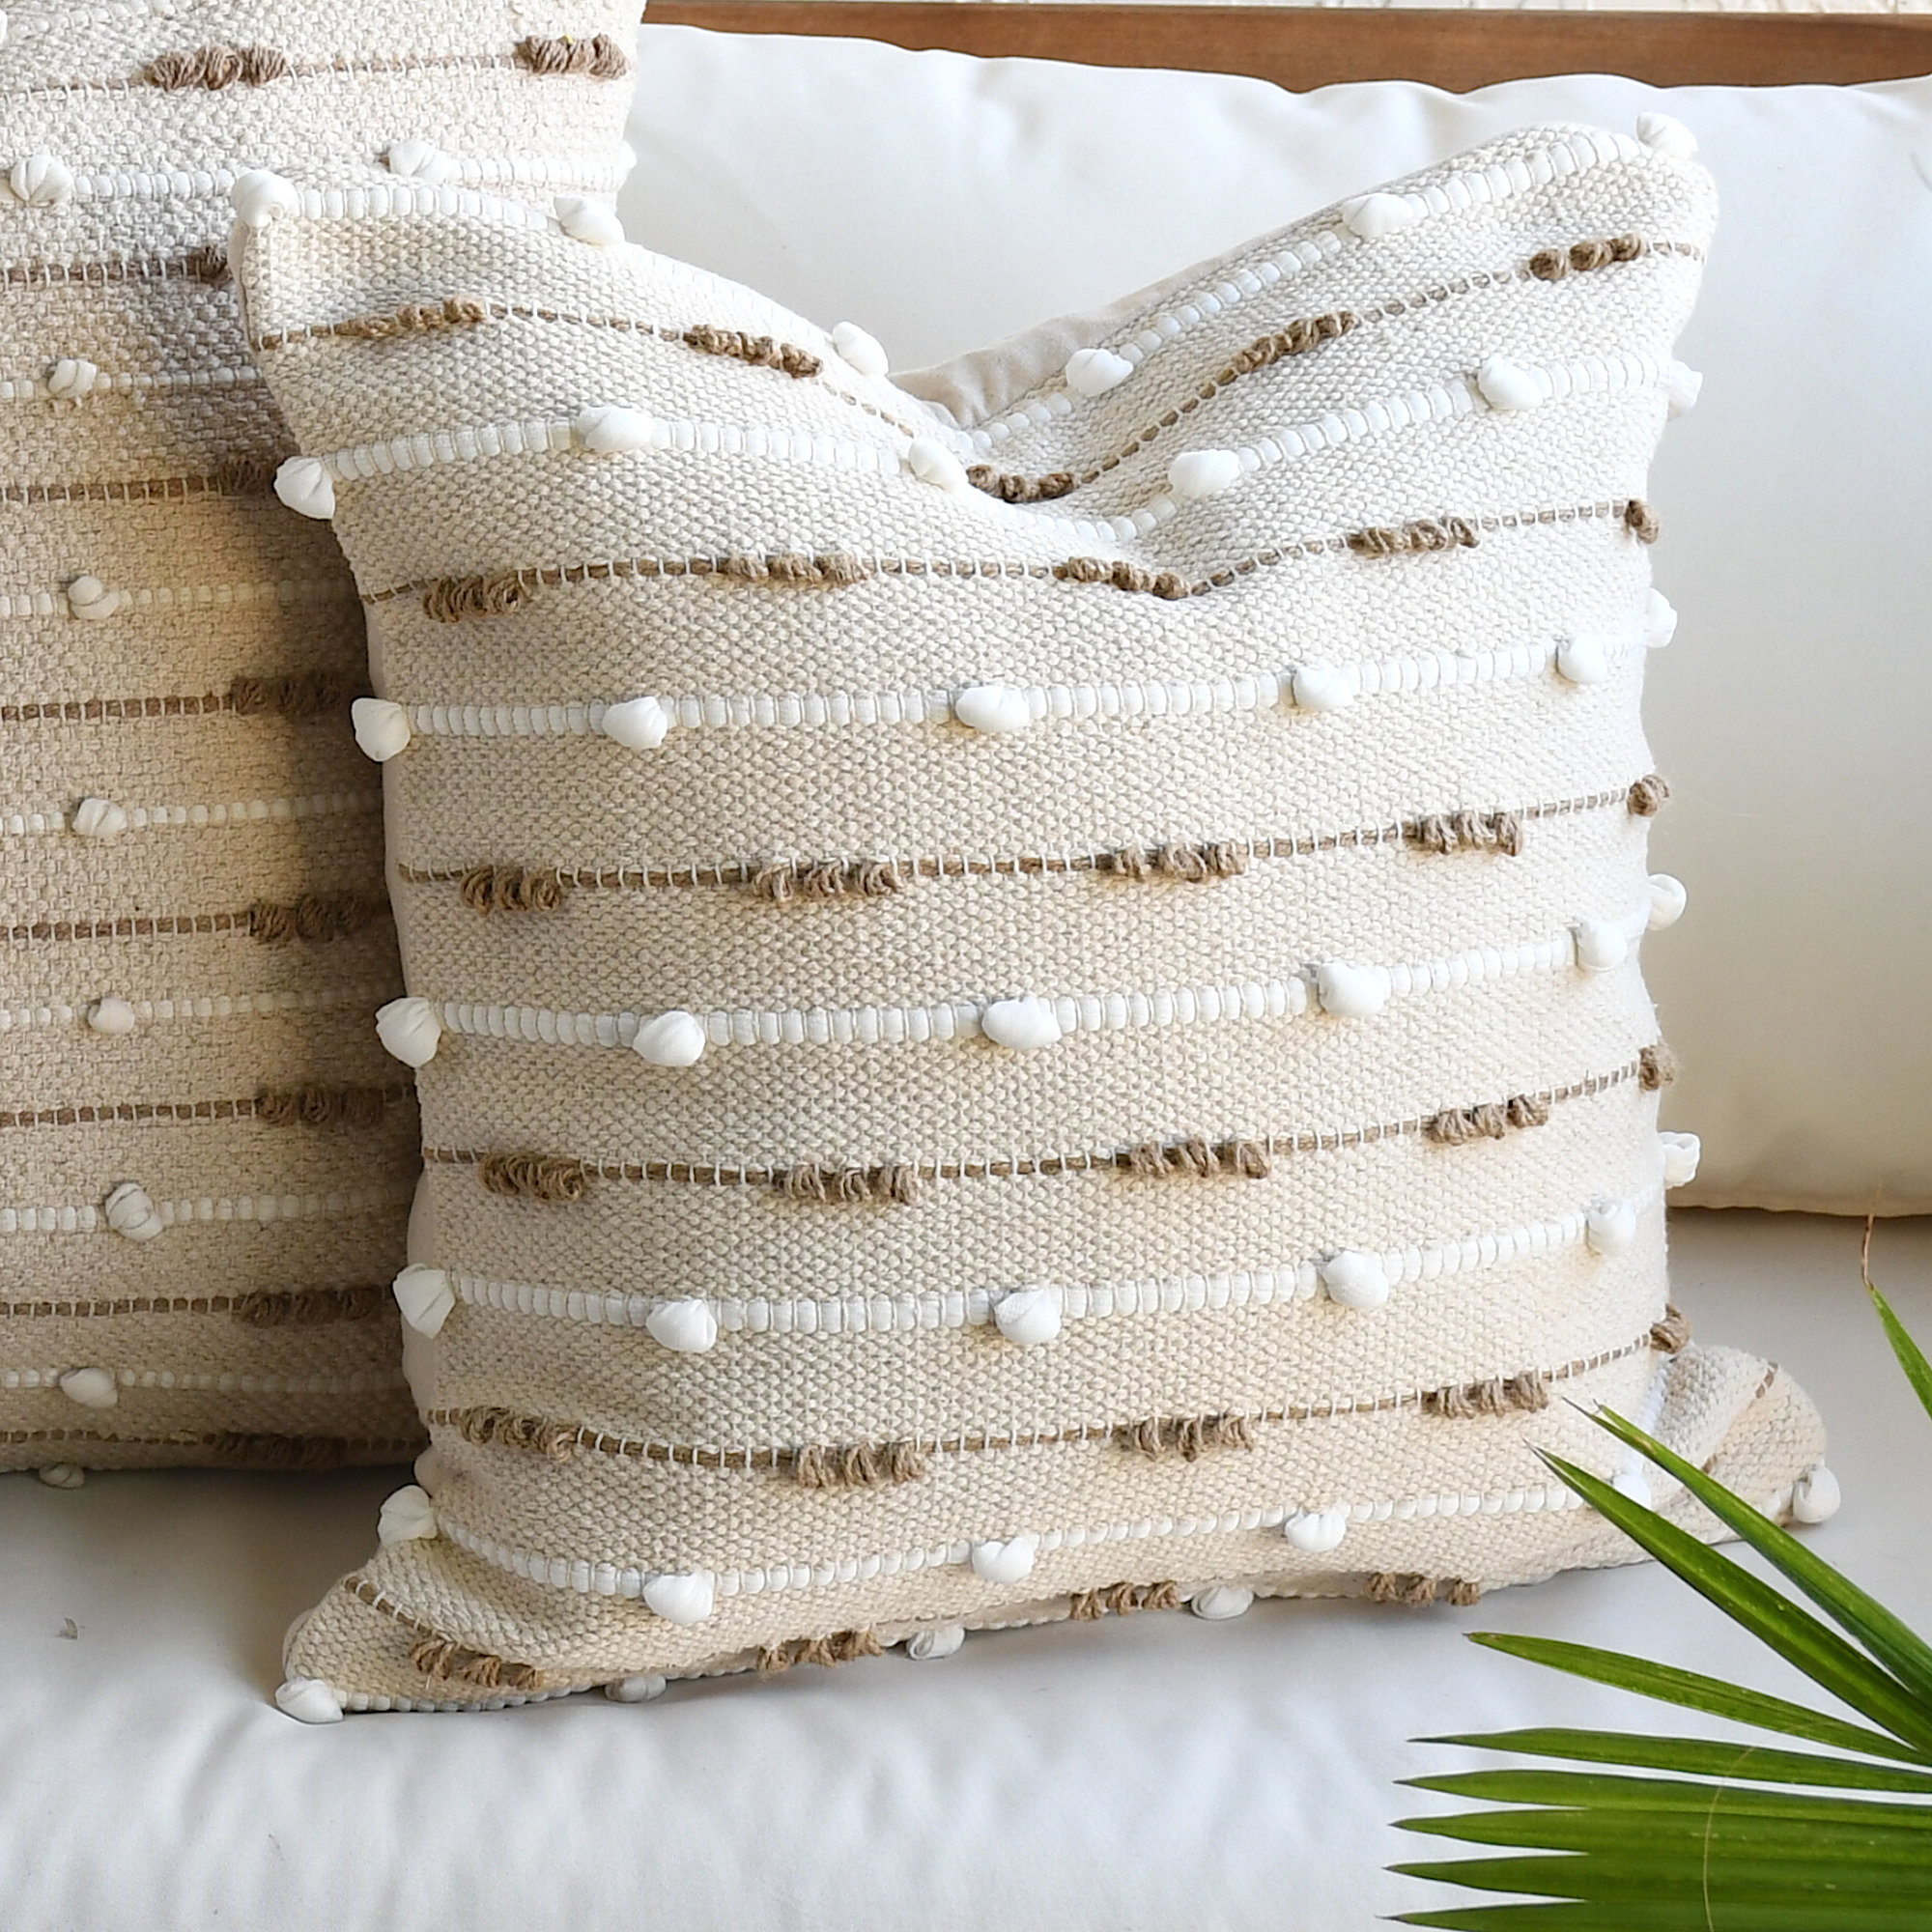 Farmhouse Pillow Covers 20x20 Set of 2 Modern Accent Decorative Throw  Pillows for Couch Chic Cotton Square Rustic Pillow Covers with Fringe for  Bed